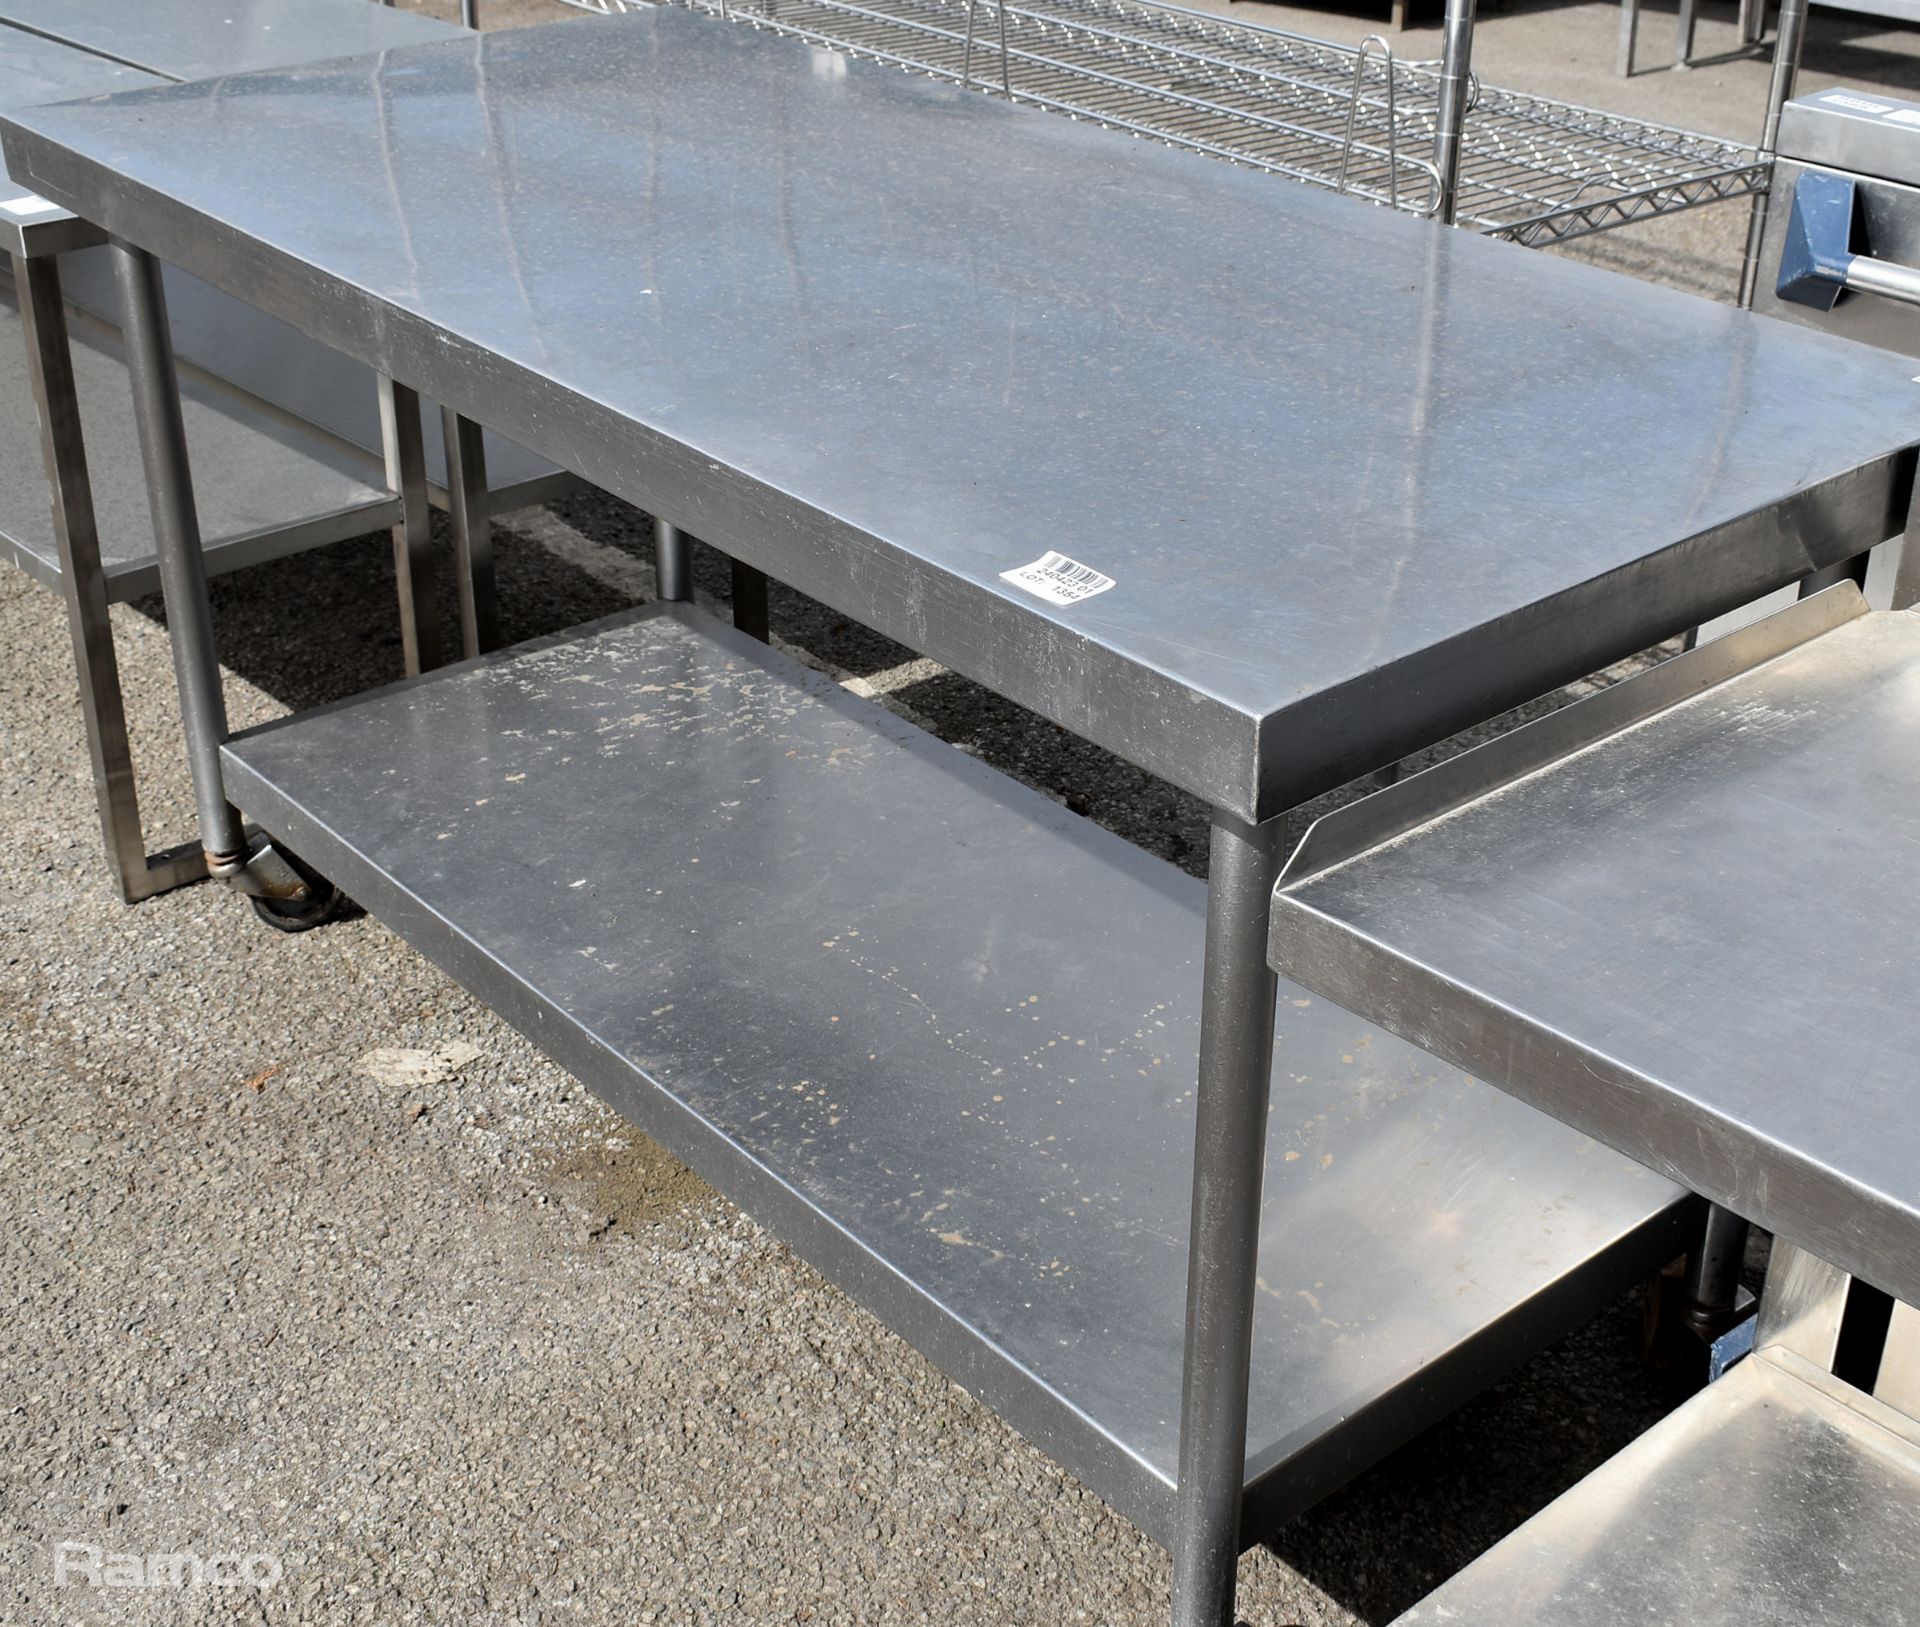 Stainless steel mobile workbench / table with bottom shelf- W 1500 x D 700 x H 835mm - Image 2 of 6